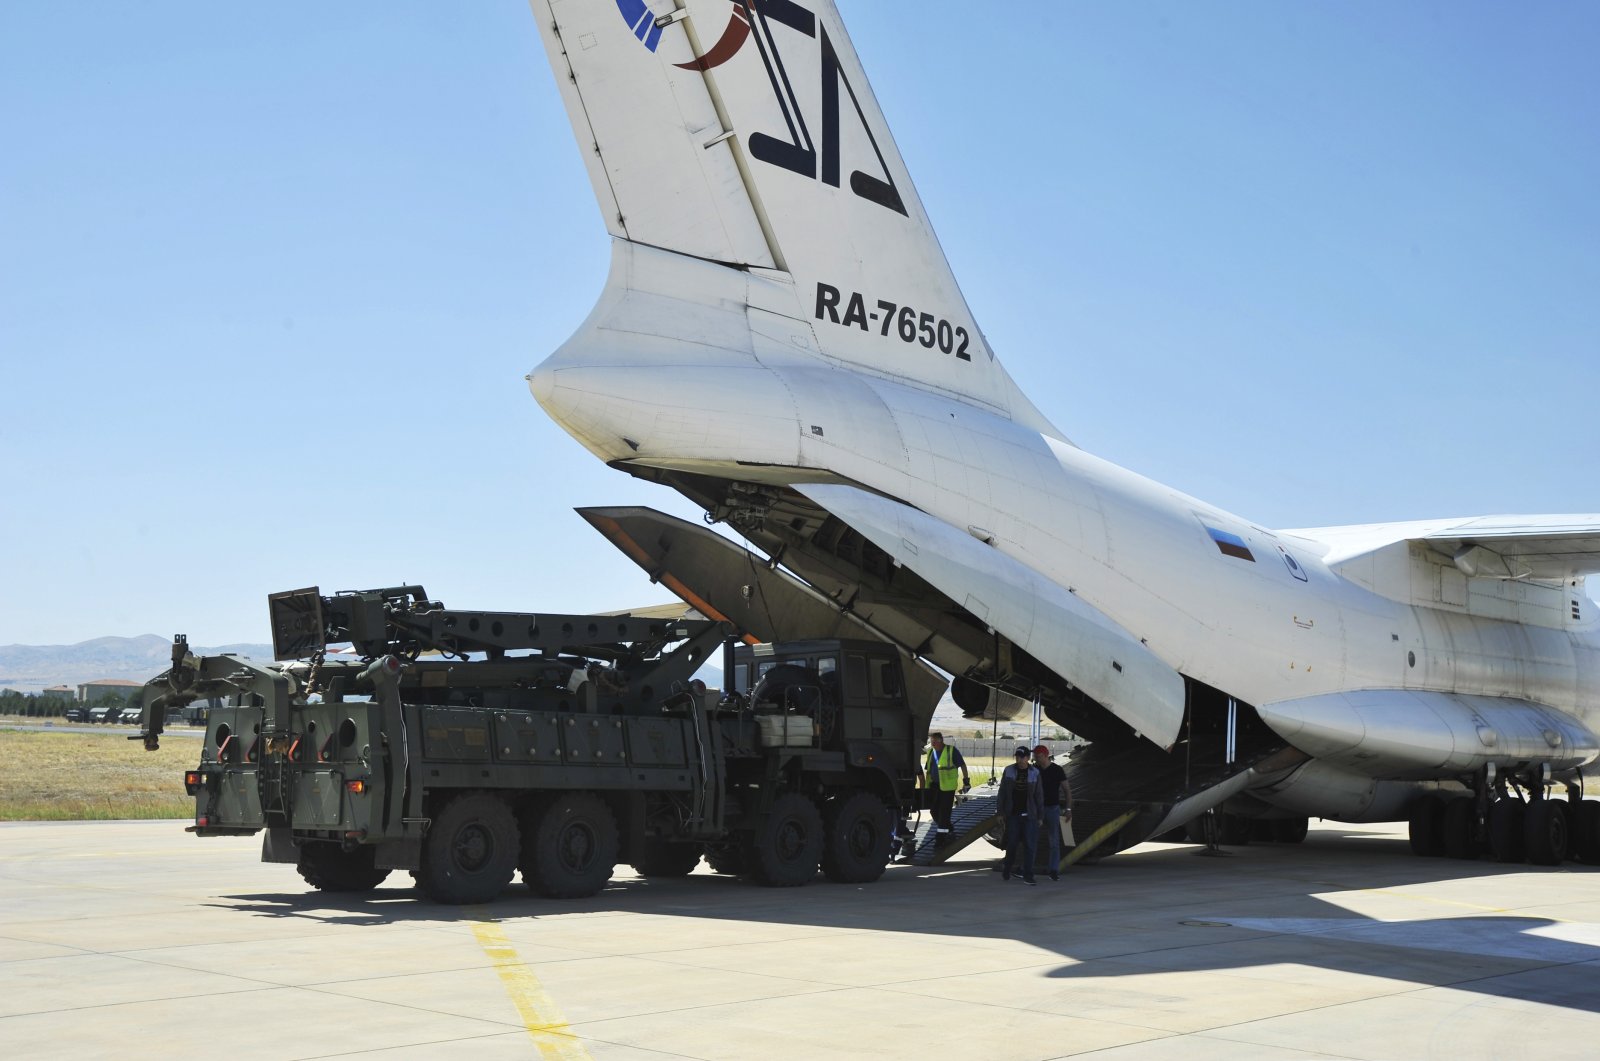 A Russian transport aircraft, carrying parts of the S-400 air defense systems, lands at Murted military airport outside Ankara, Turkey, Aug. 27, 2019. (Turkey&#039;s Defense Ministry via AP, Pool, File)